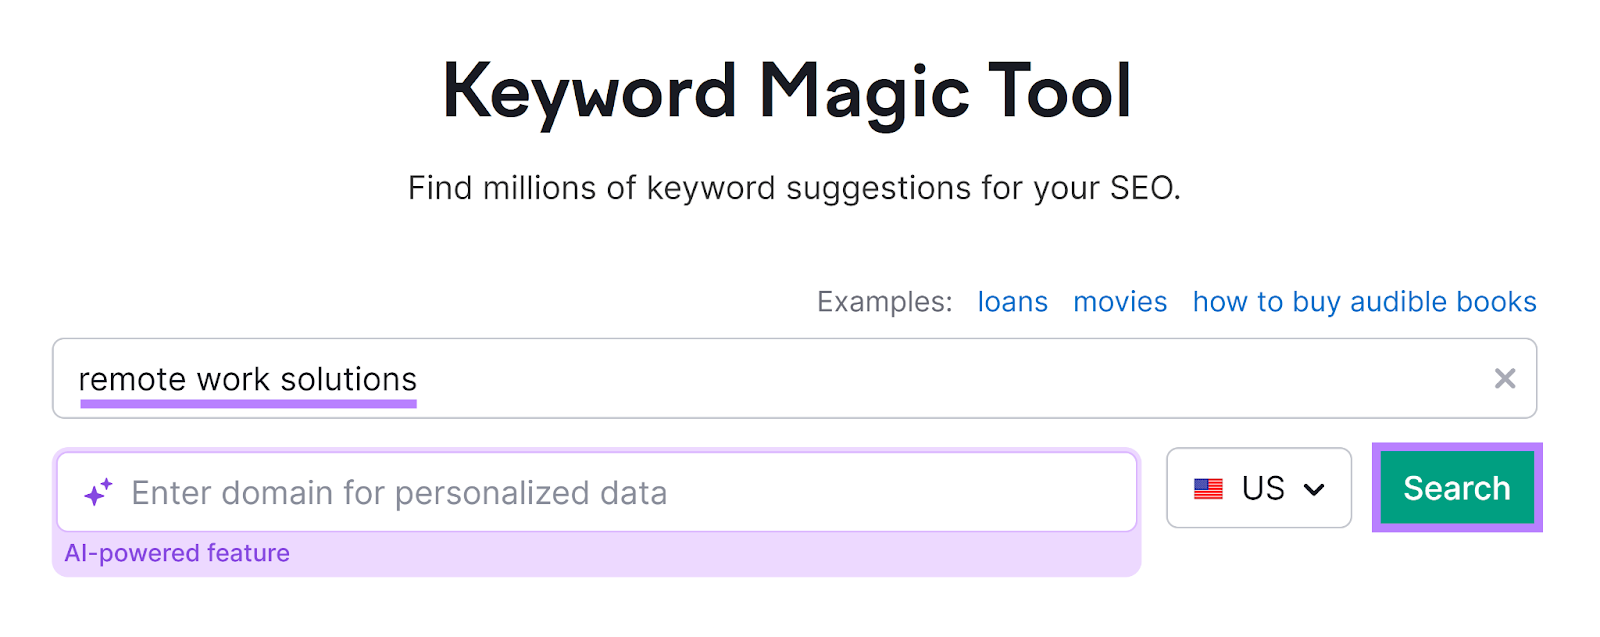 Keyword Magic Tool start with keyword entered and Search button highlighted.